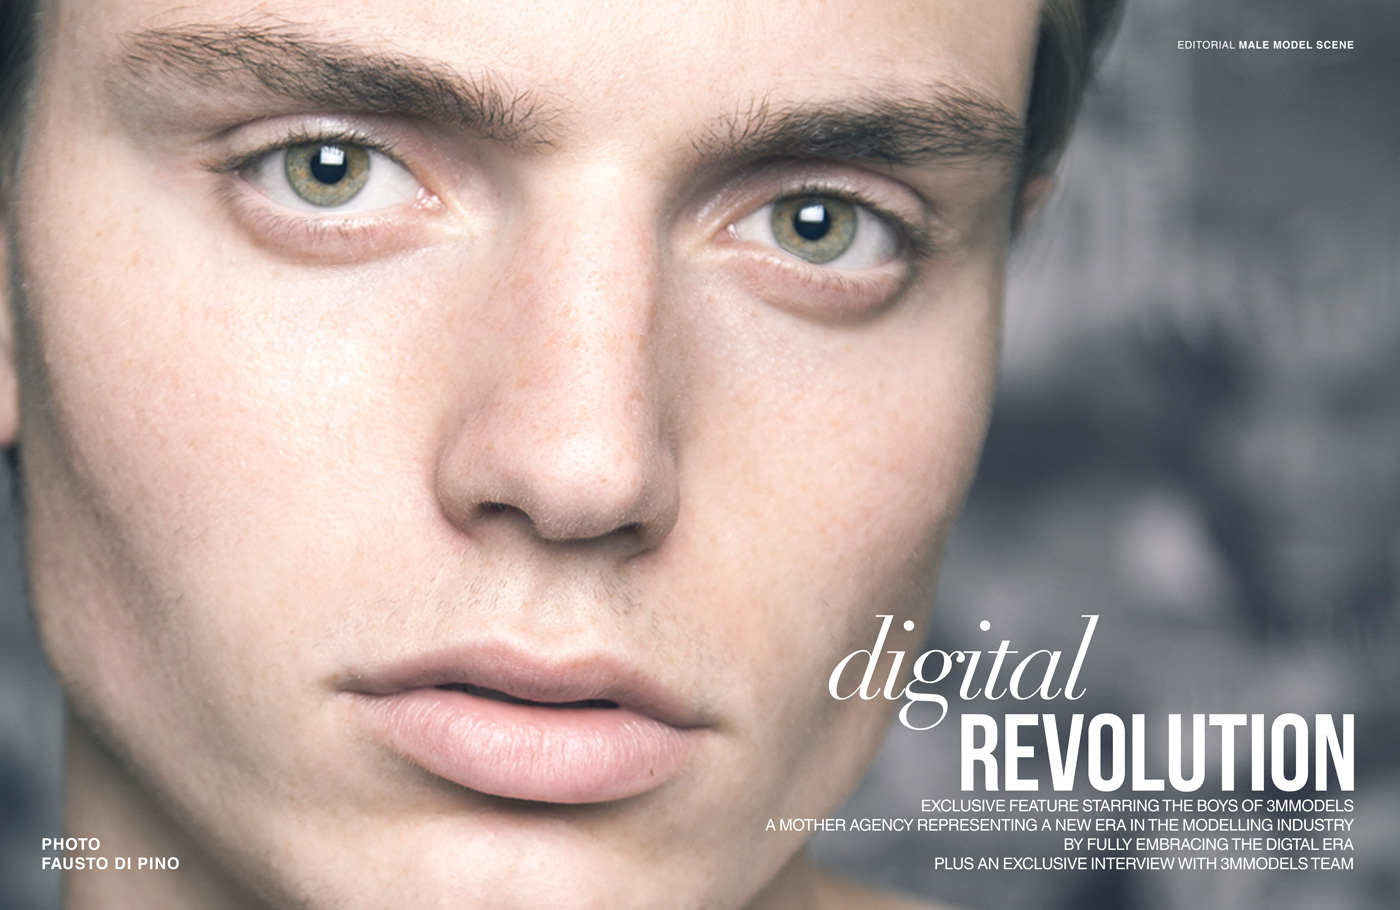 Digital Revolution With 3mmodels By Fausto Di Pino For Male Model Scene